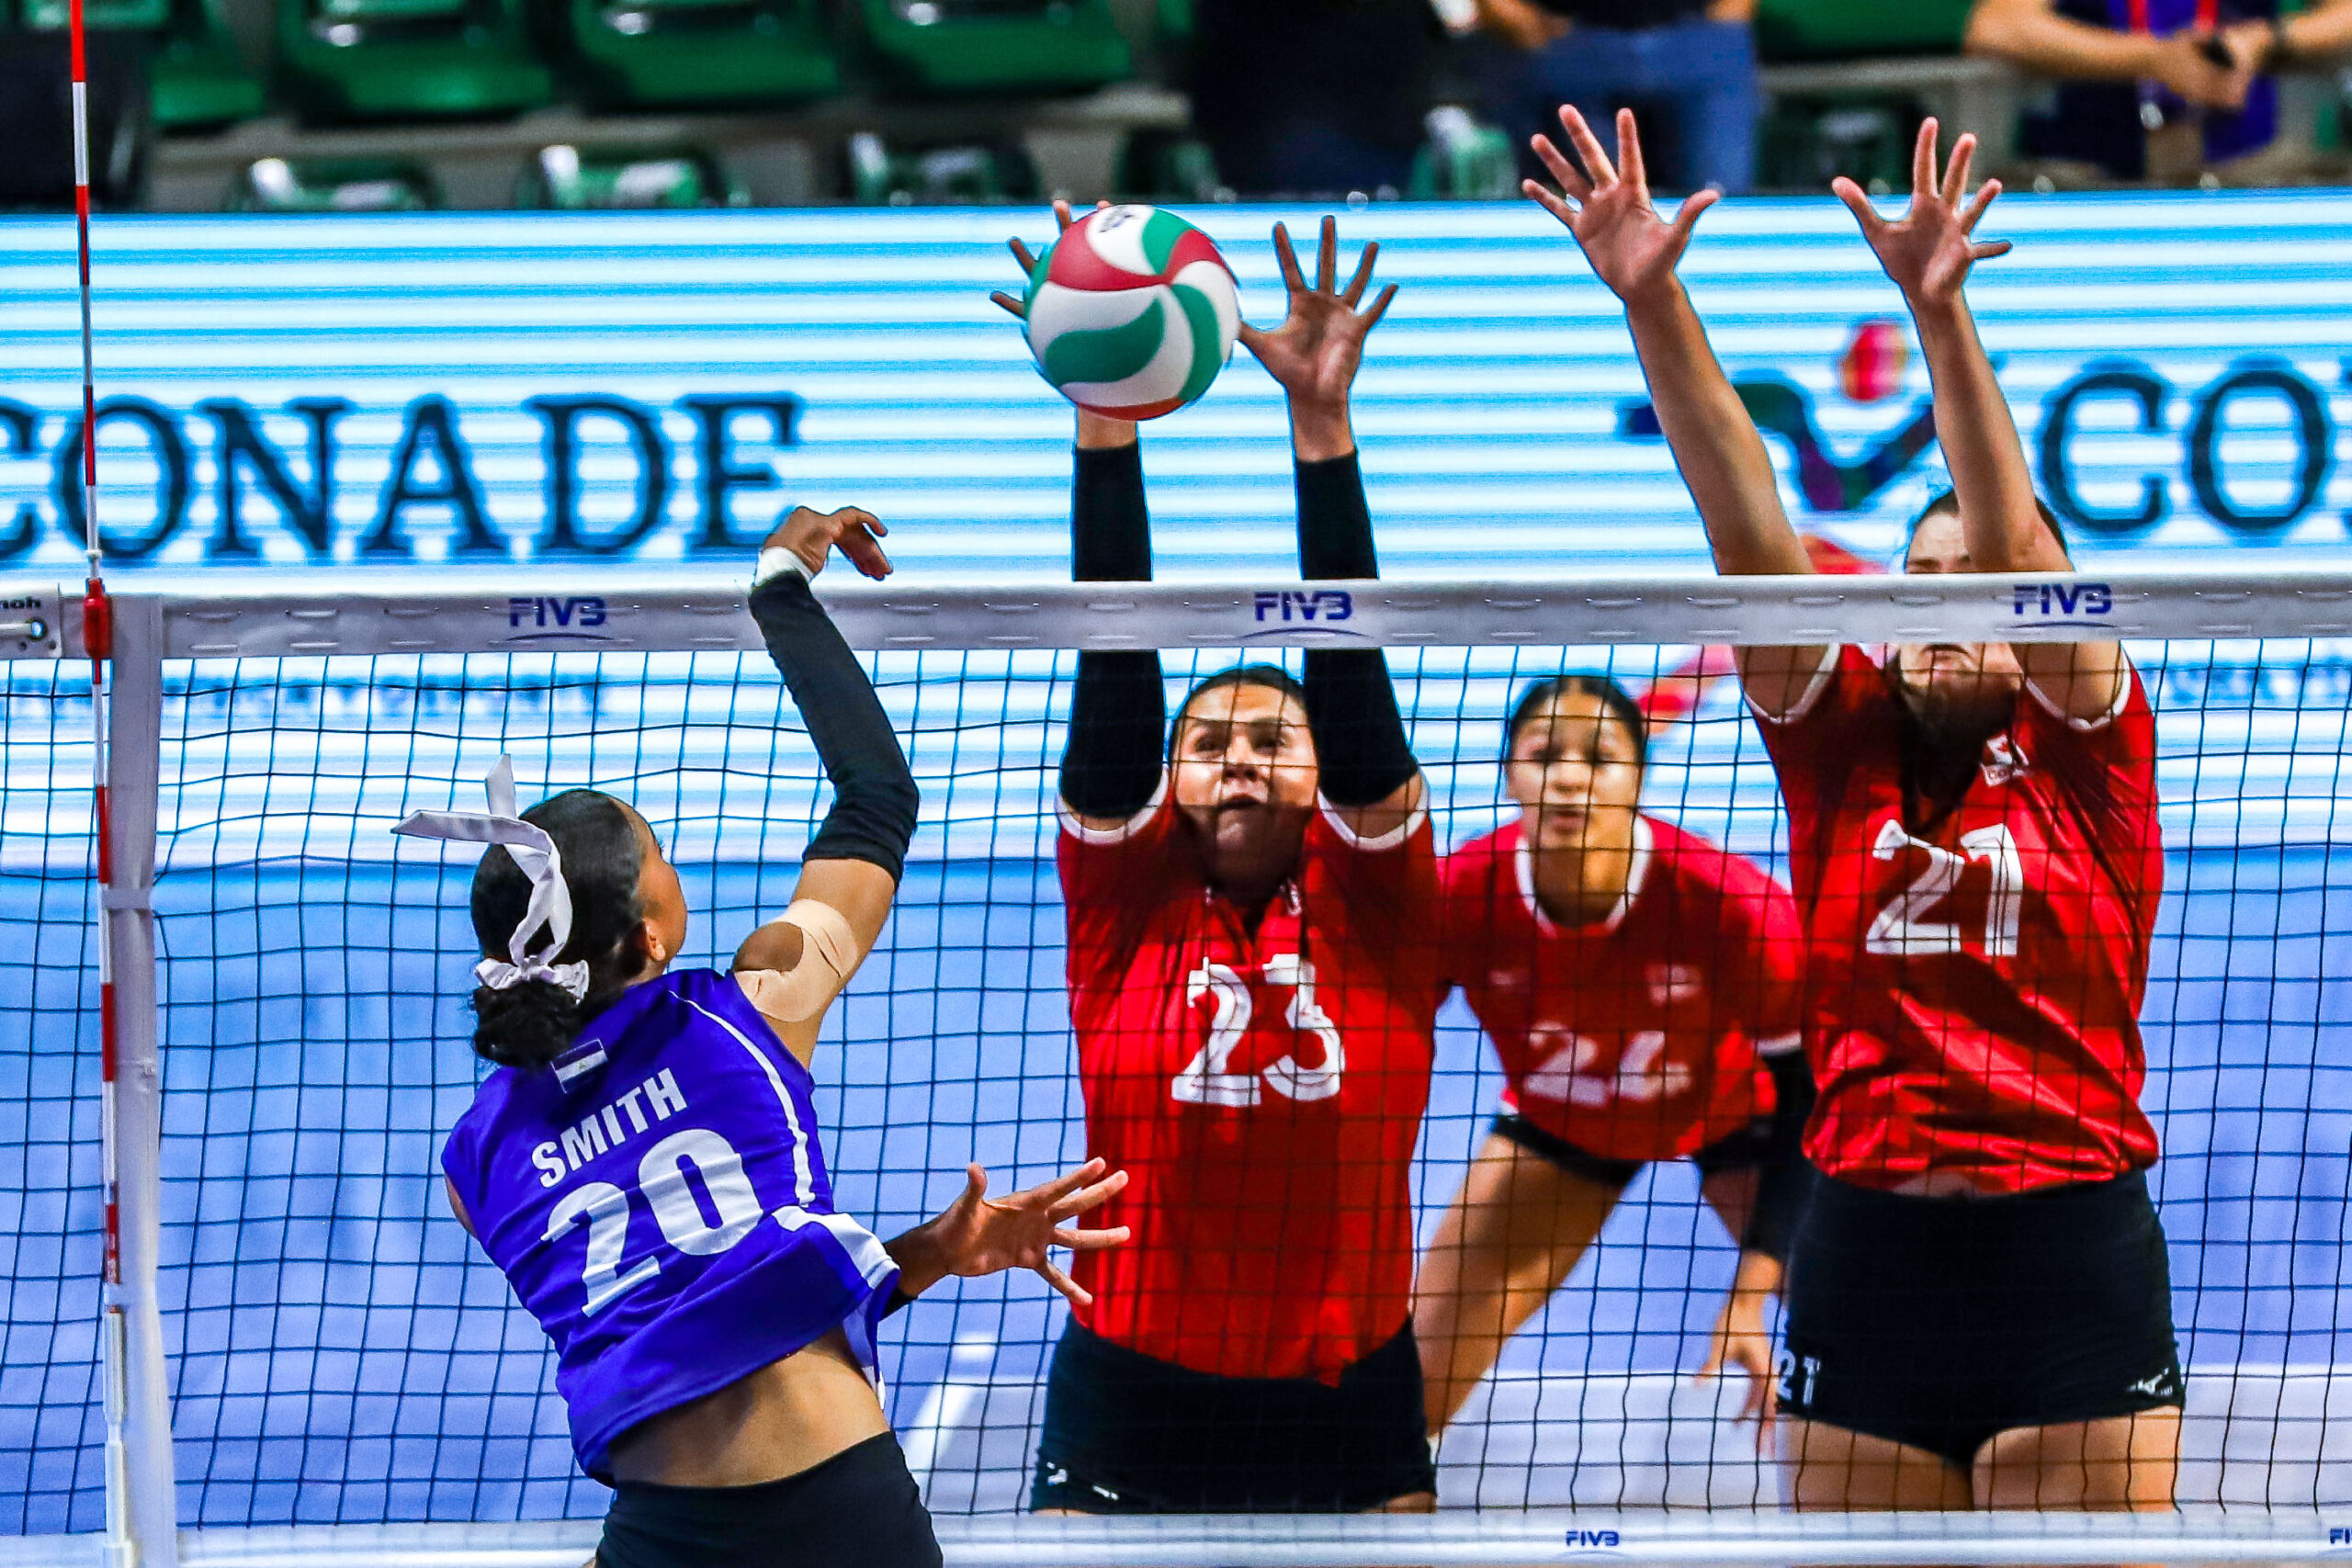 Canada grabs first win beating Nicaragua